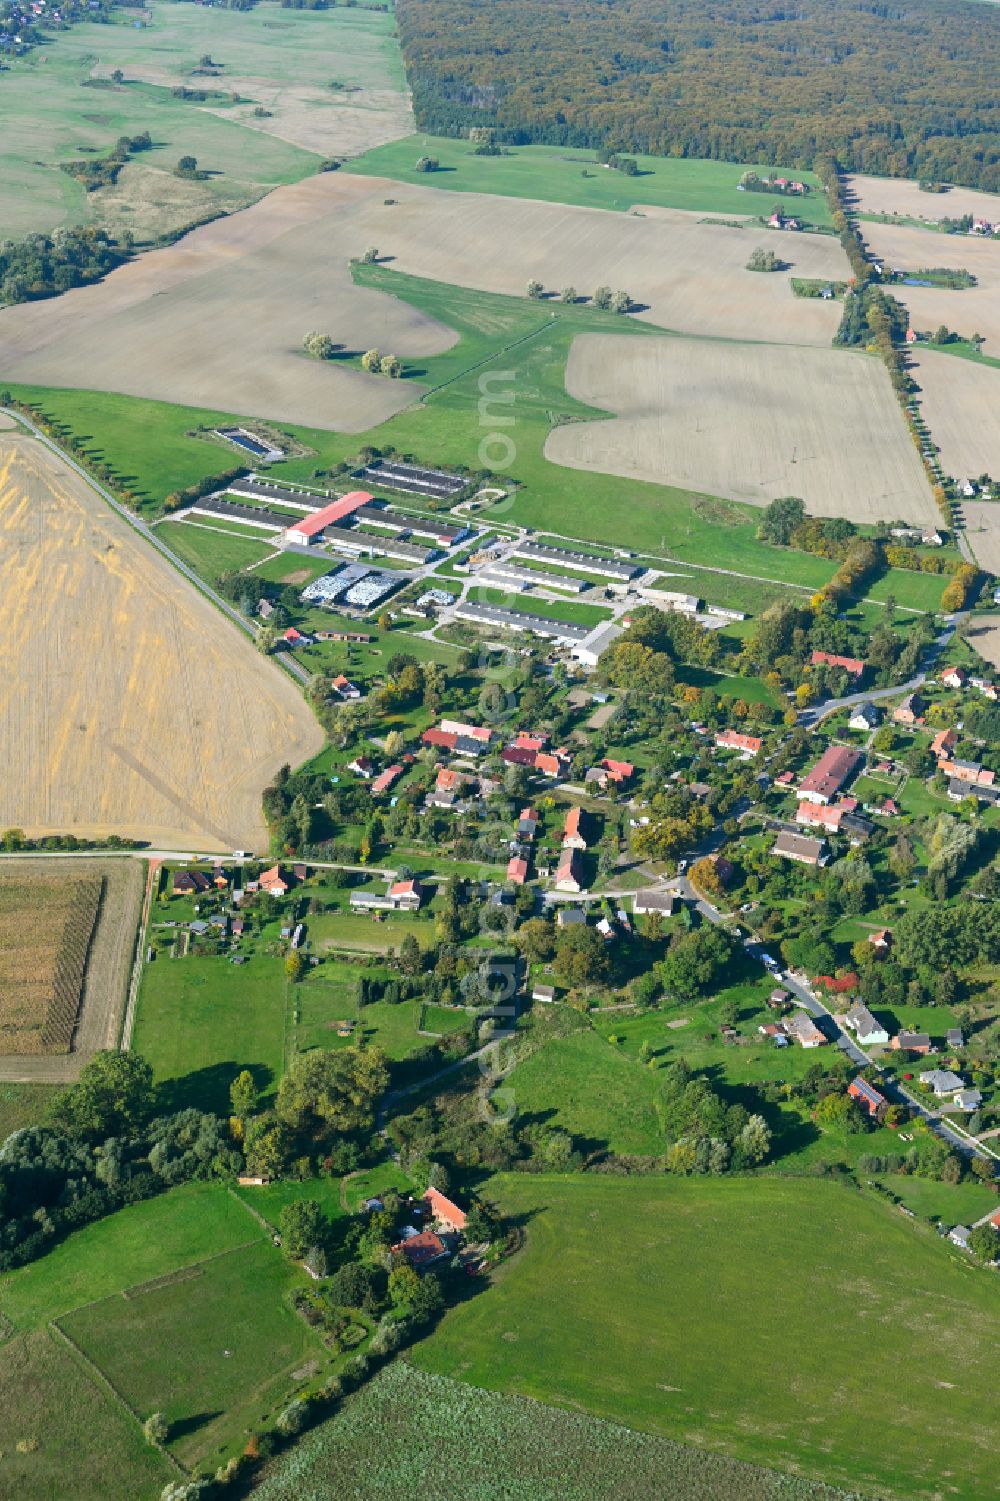 Aerial image Grauenhagen - Agricultural land and field boundaries surround the settlement area of the village in Grauenhagen in the state Mecklenburg - Western Pomerania, Germany